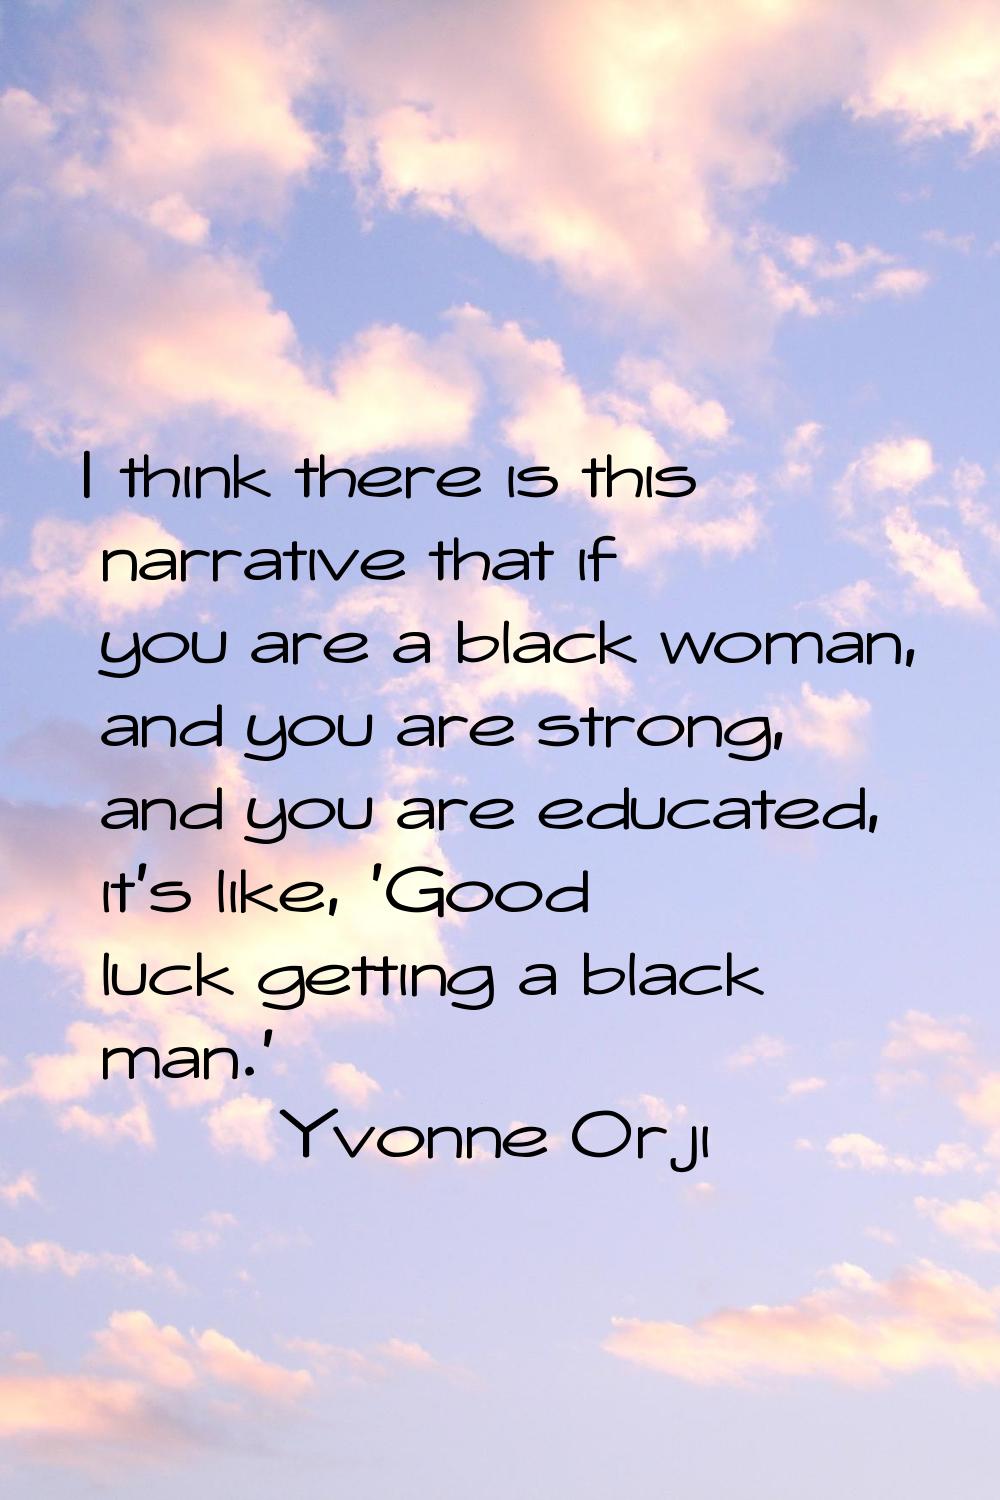 I think there is this narrative that if you are a black woman, and you are strong, and you are educ